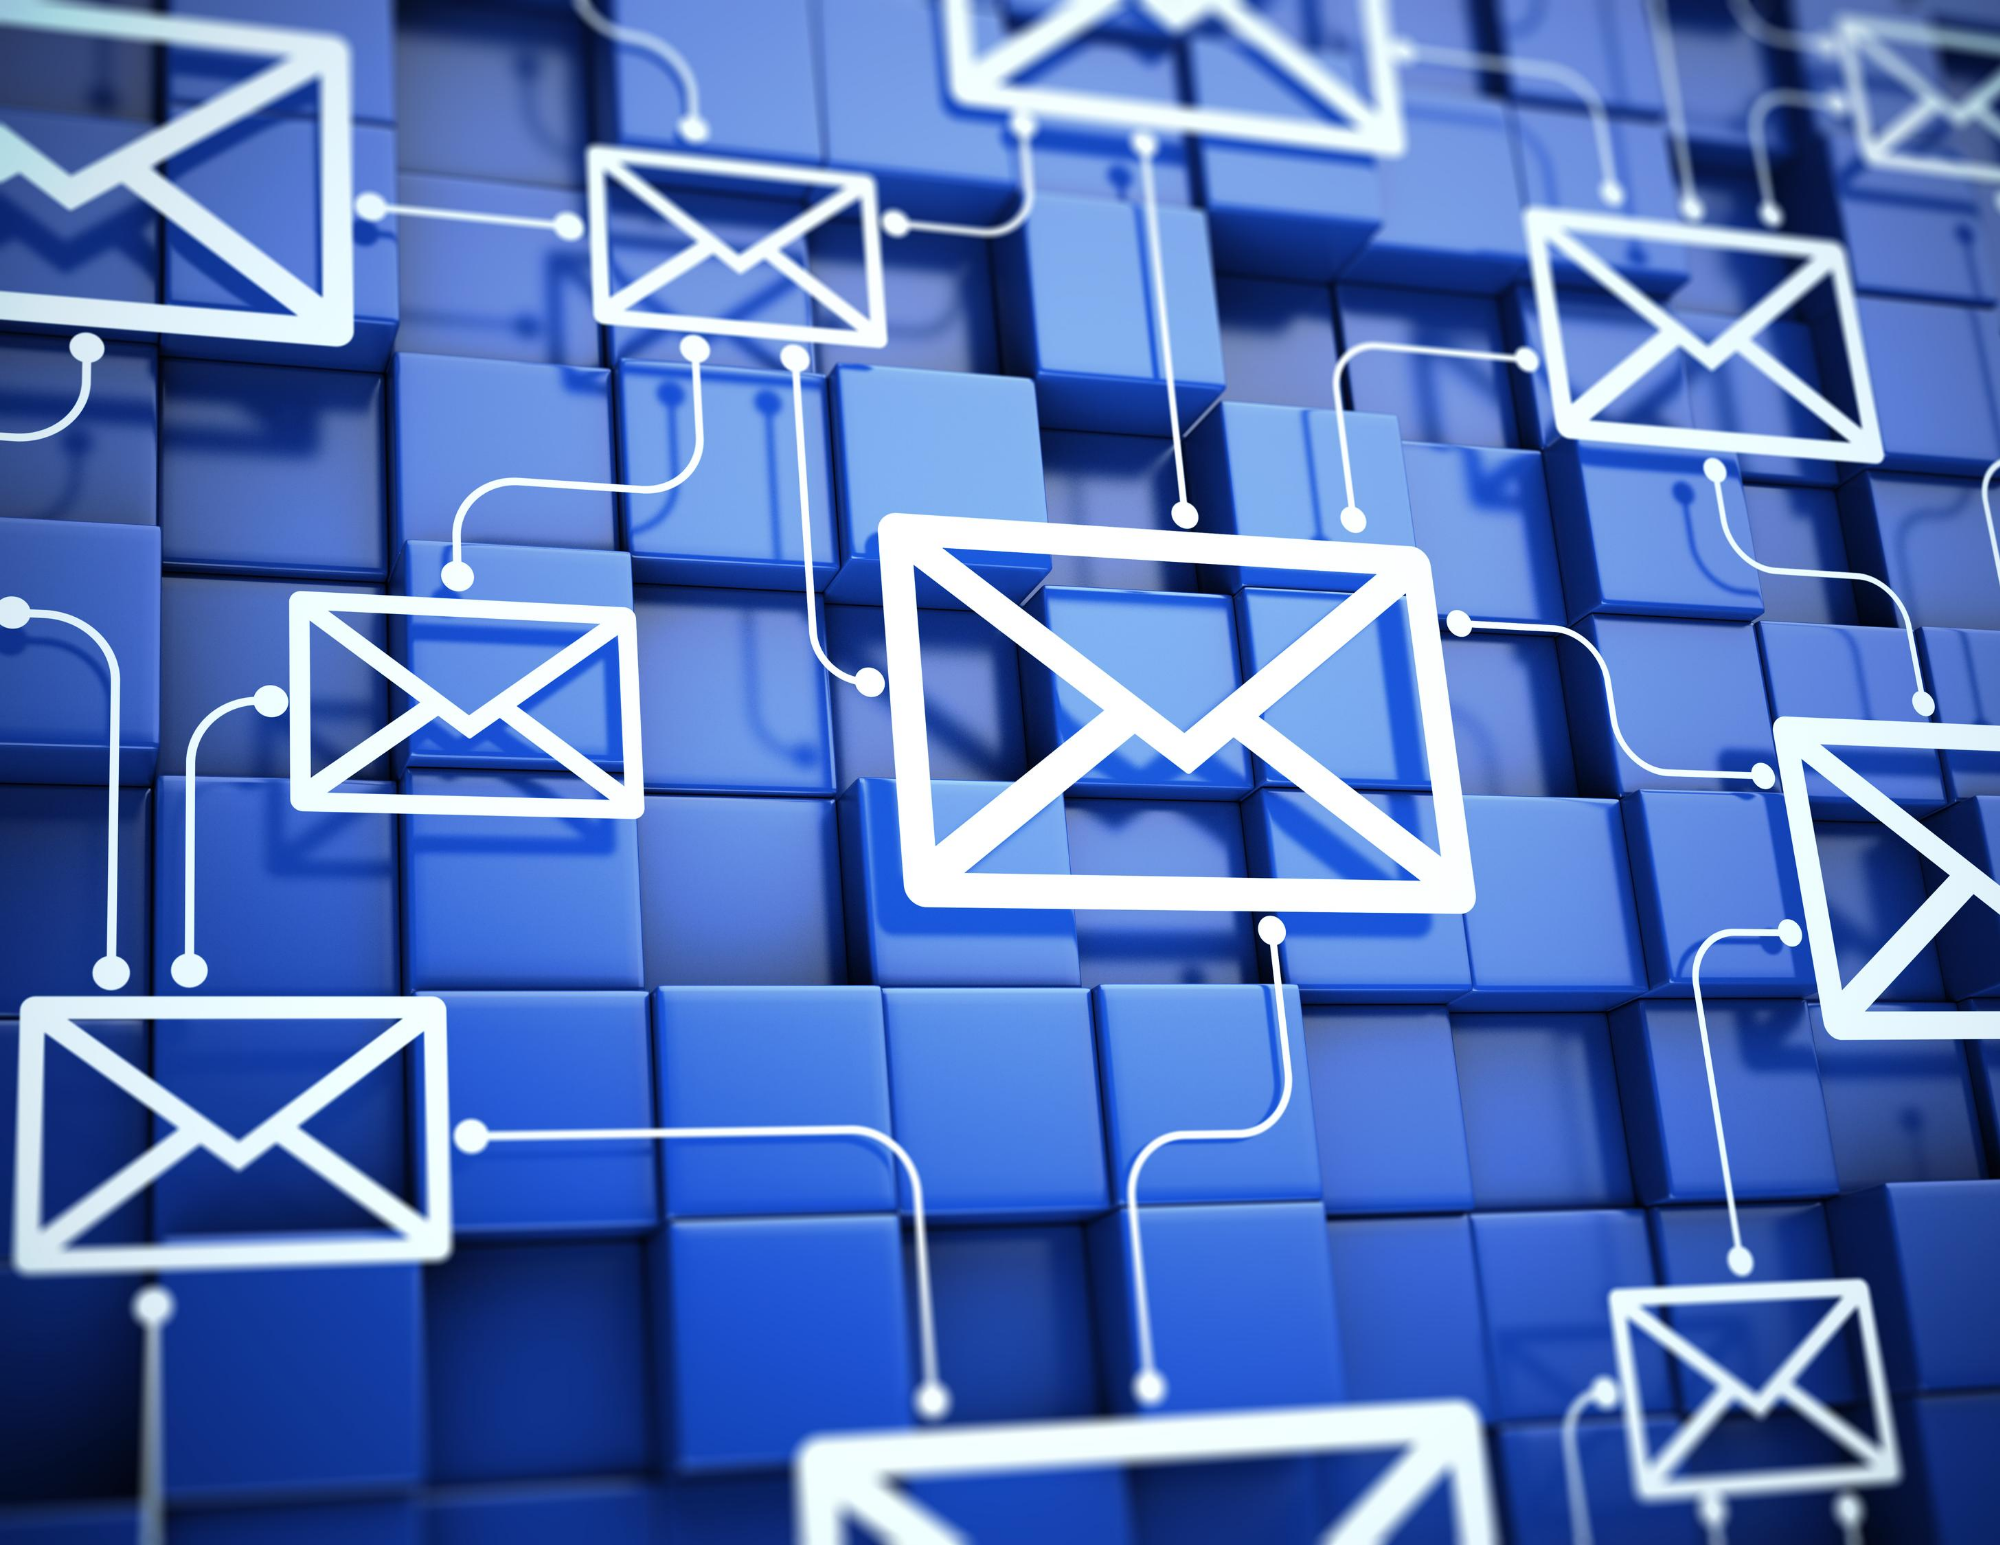 icons of envelopes on blue background, representing direct mail marketing